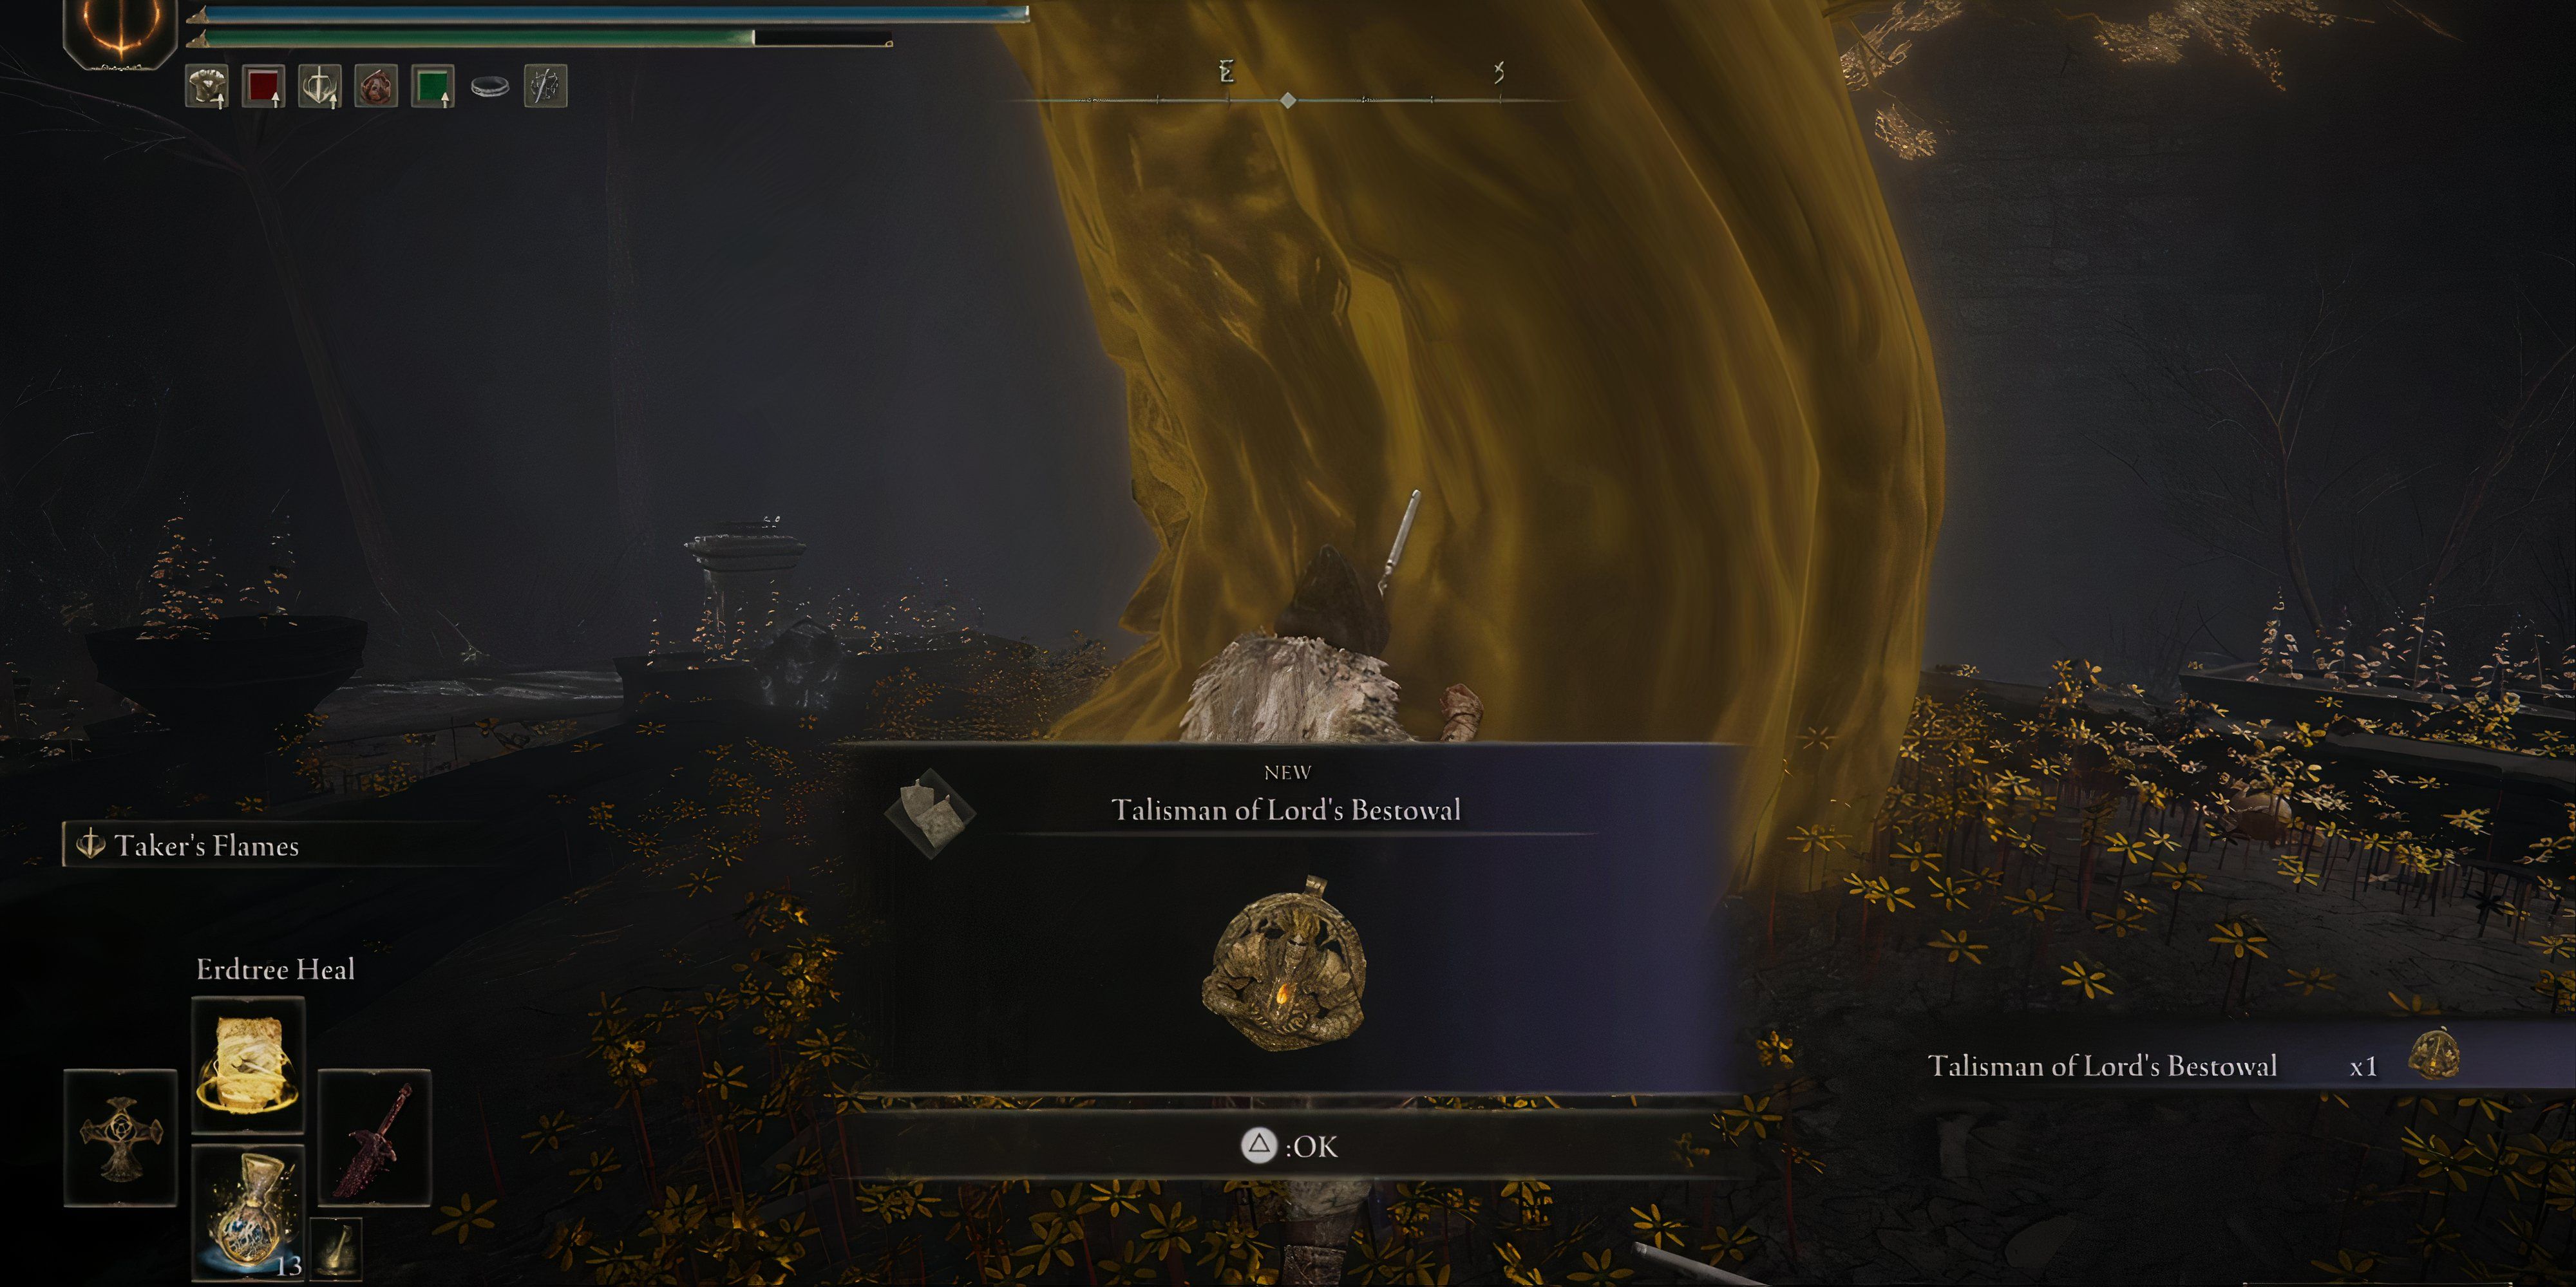 How To Get Talisman Of Lord's Bestowal Featured Image In Shadow Of The Erdtree